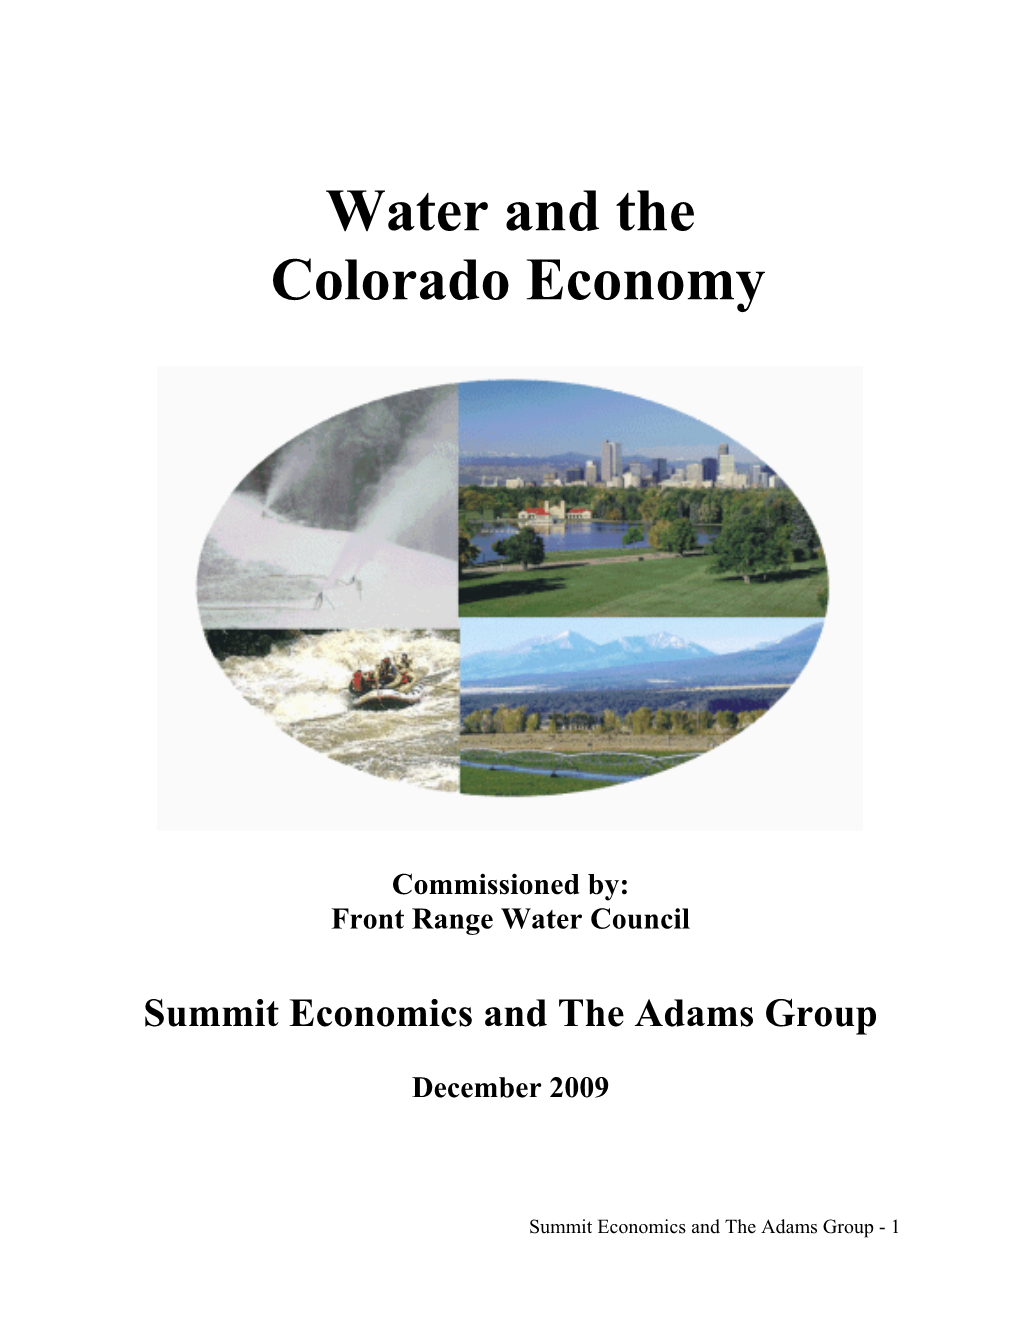 Water and the Colorado Economy